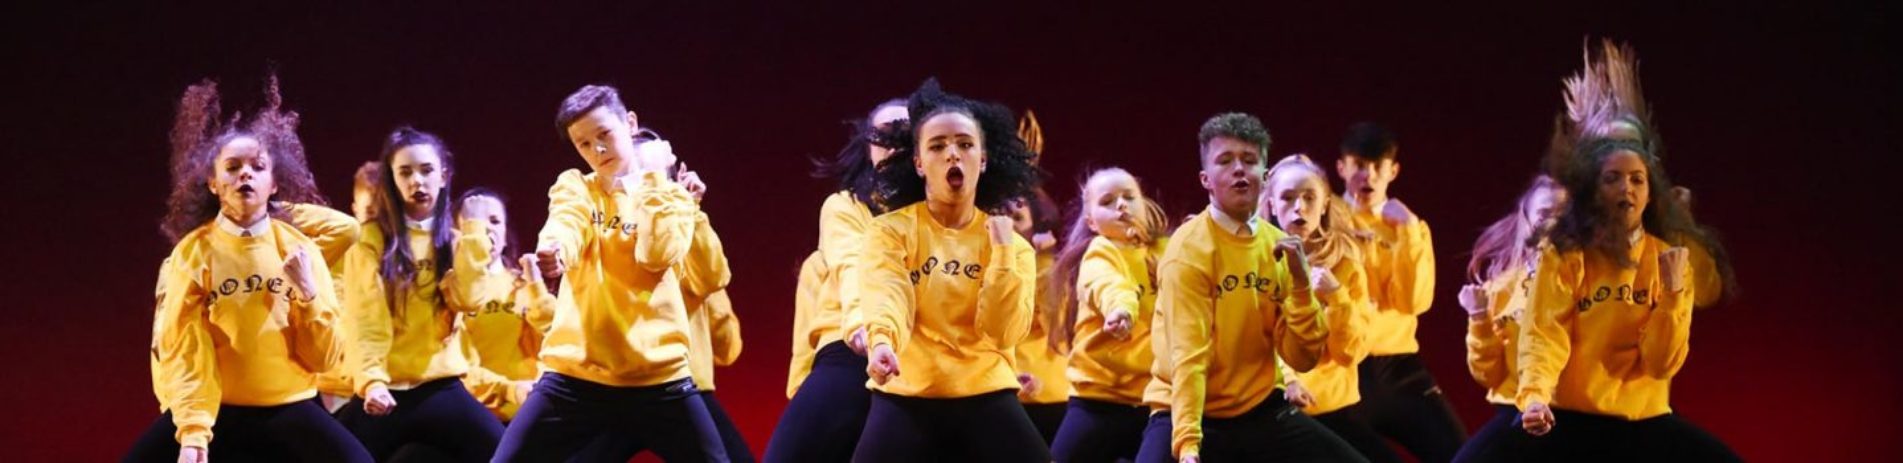 urbaniks-dance-troup-young-people-in-yellow-tops-dancing-vigorously